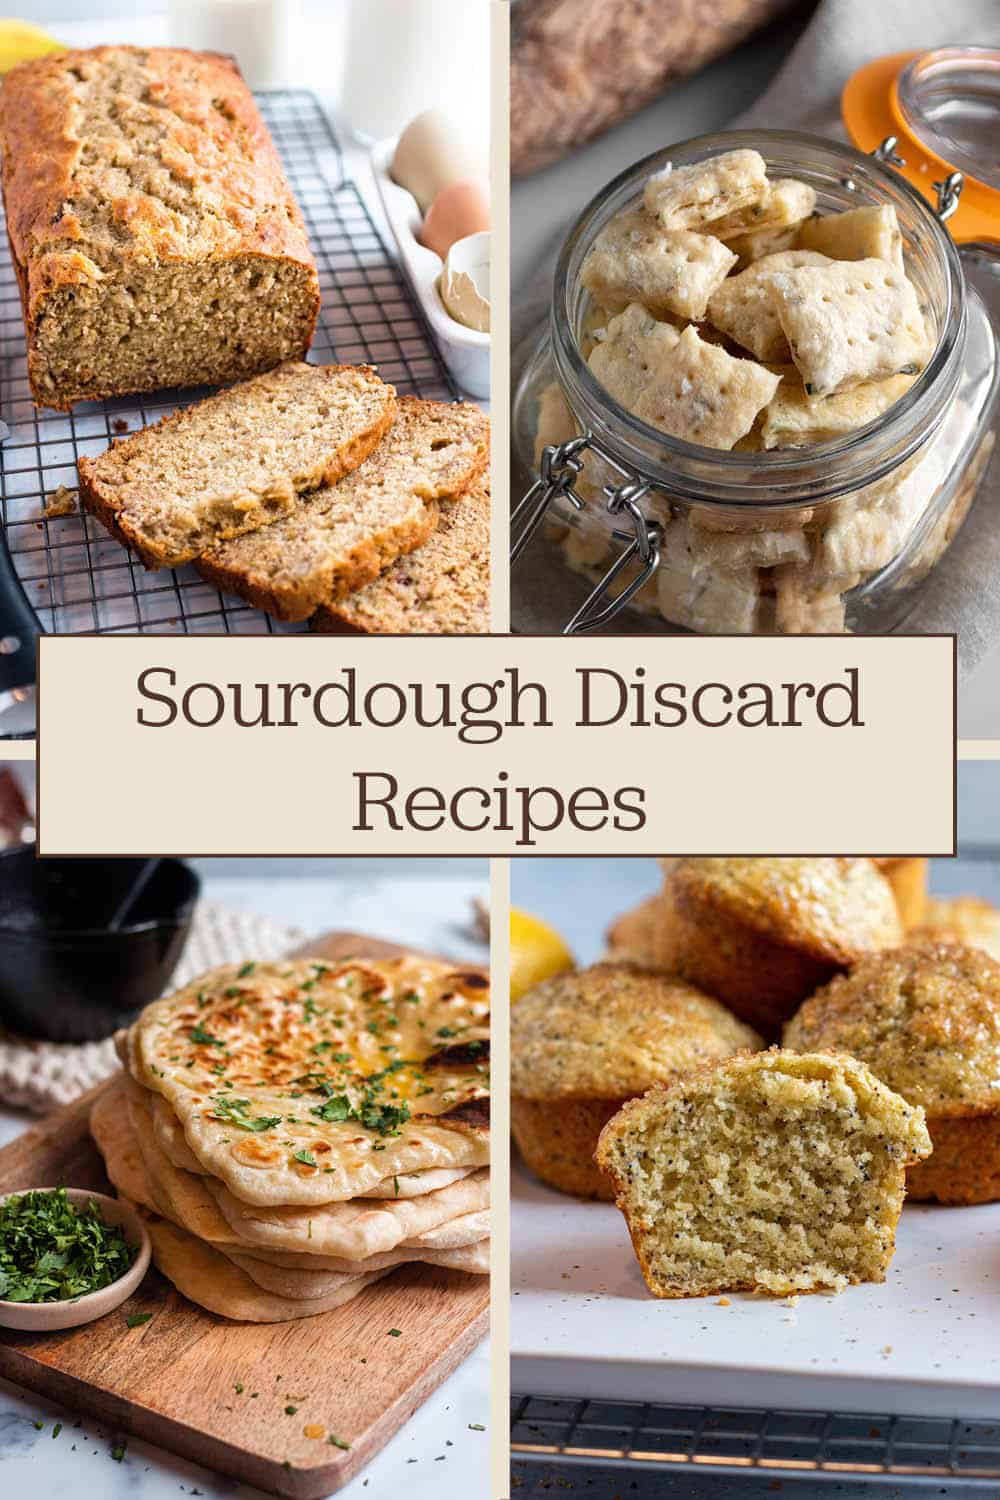 Four different sourdough recipes, banana bread, crackers, naan and lemon muffins in a collage.